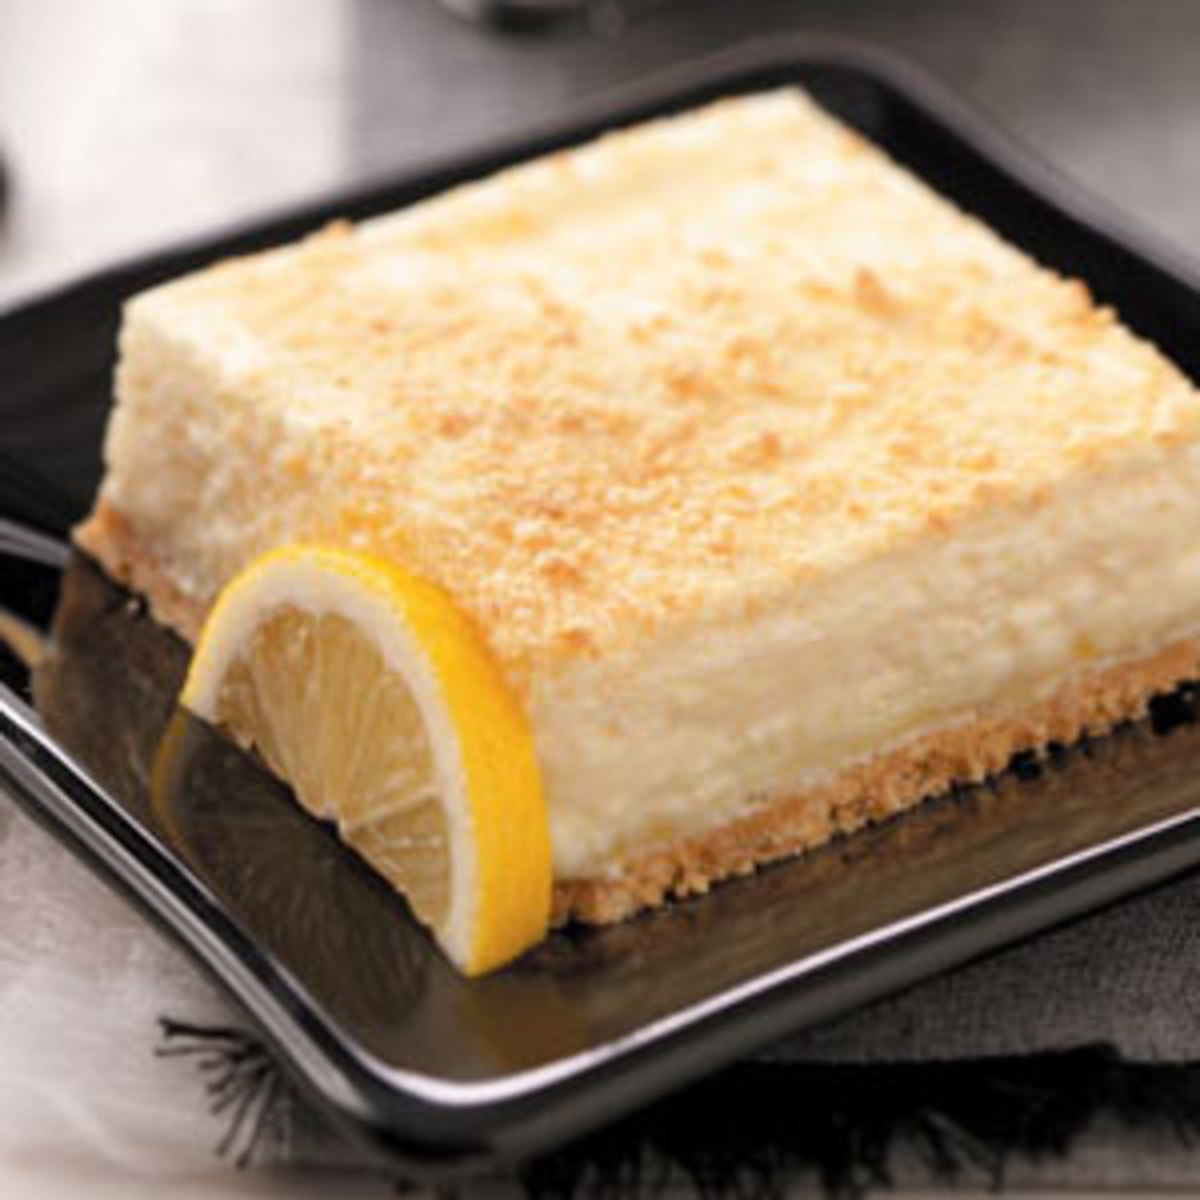 Dessert Recipes With Evaporated Milk | HubPages